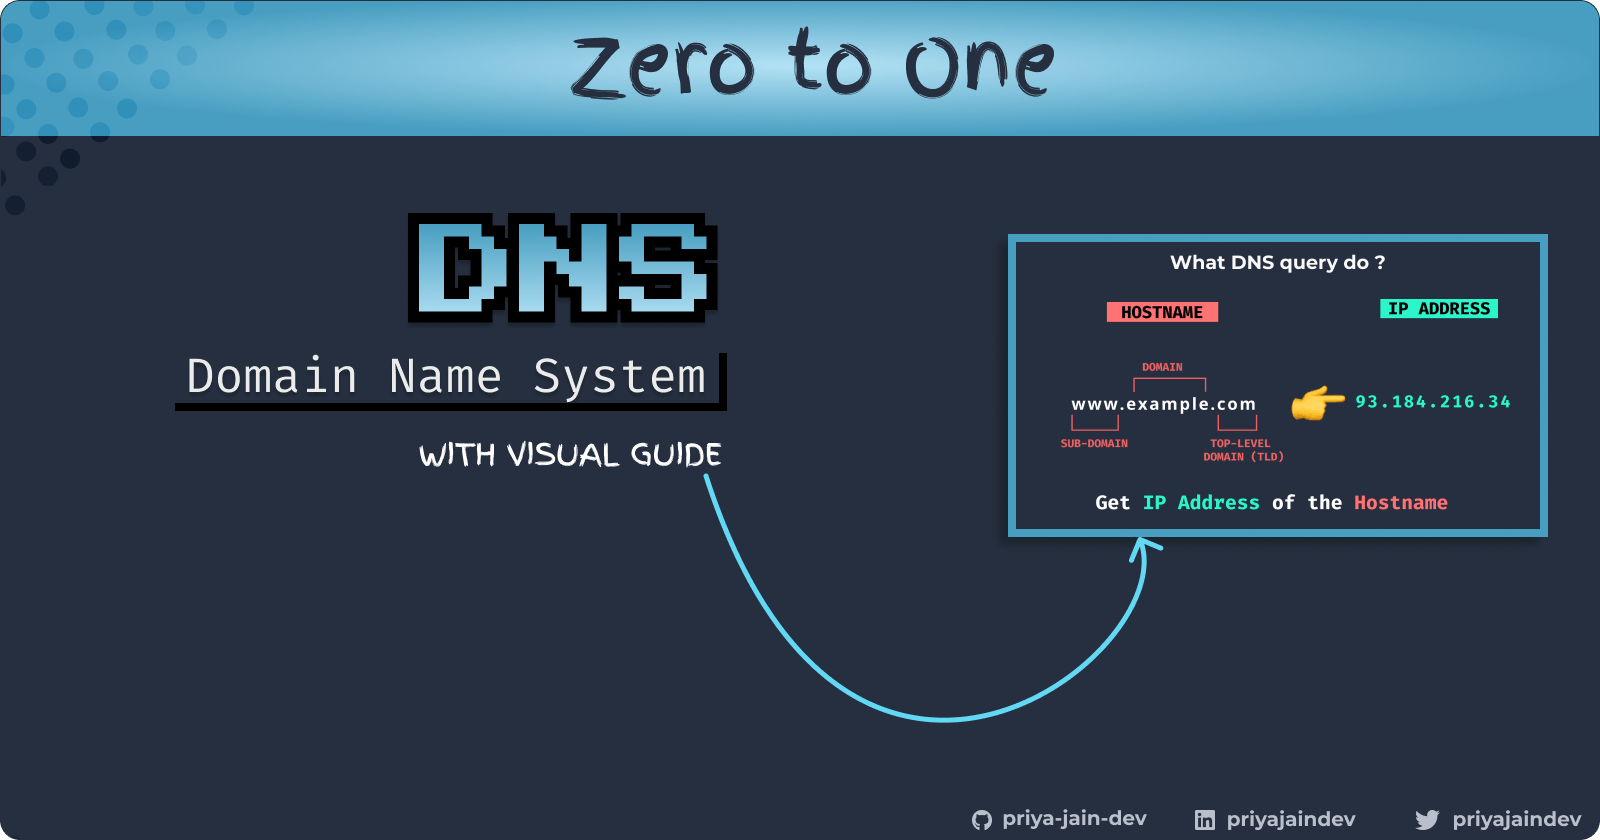 Learning DNS (Domain Name System) with visual guide